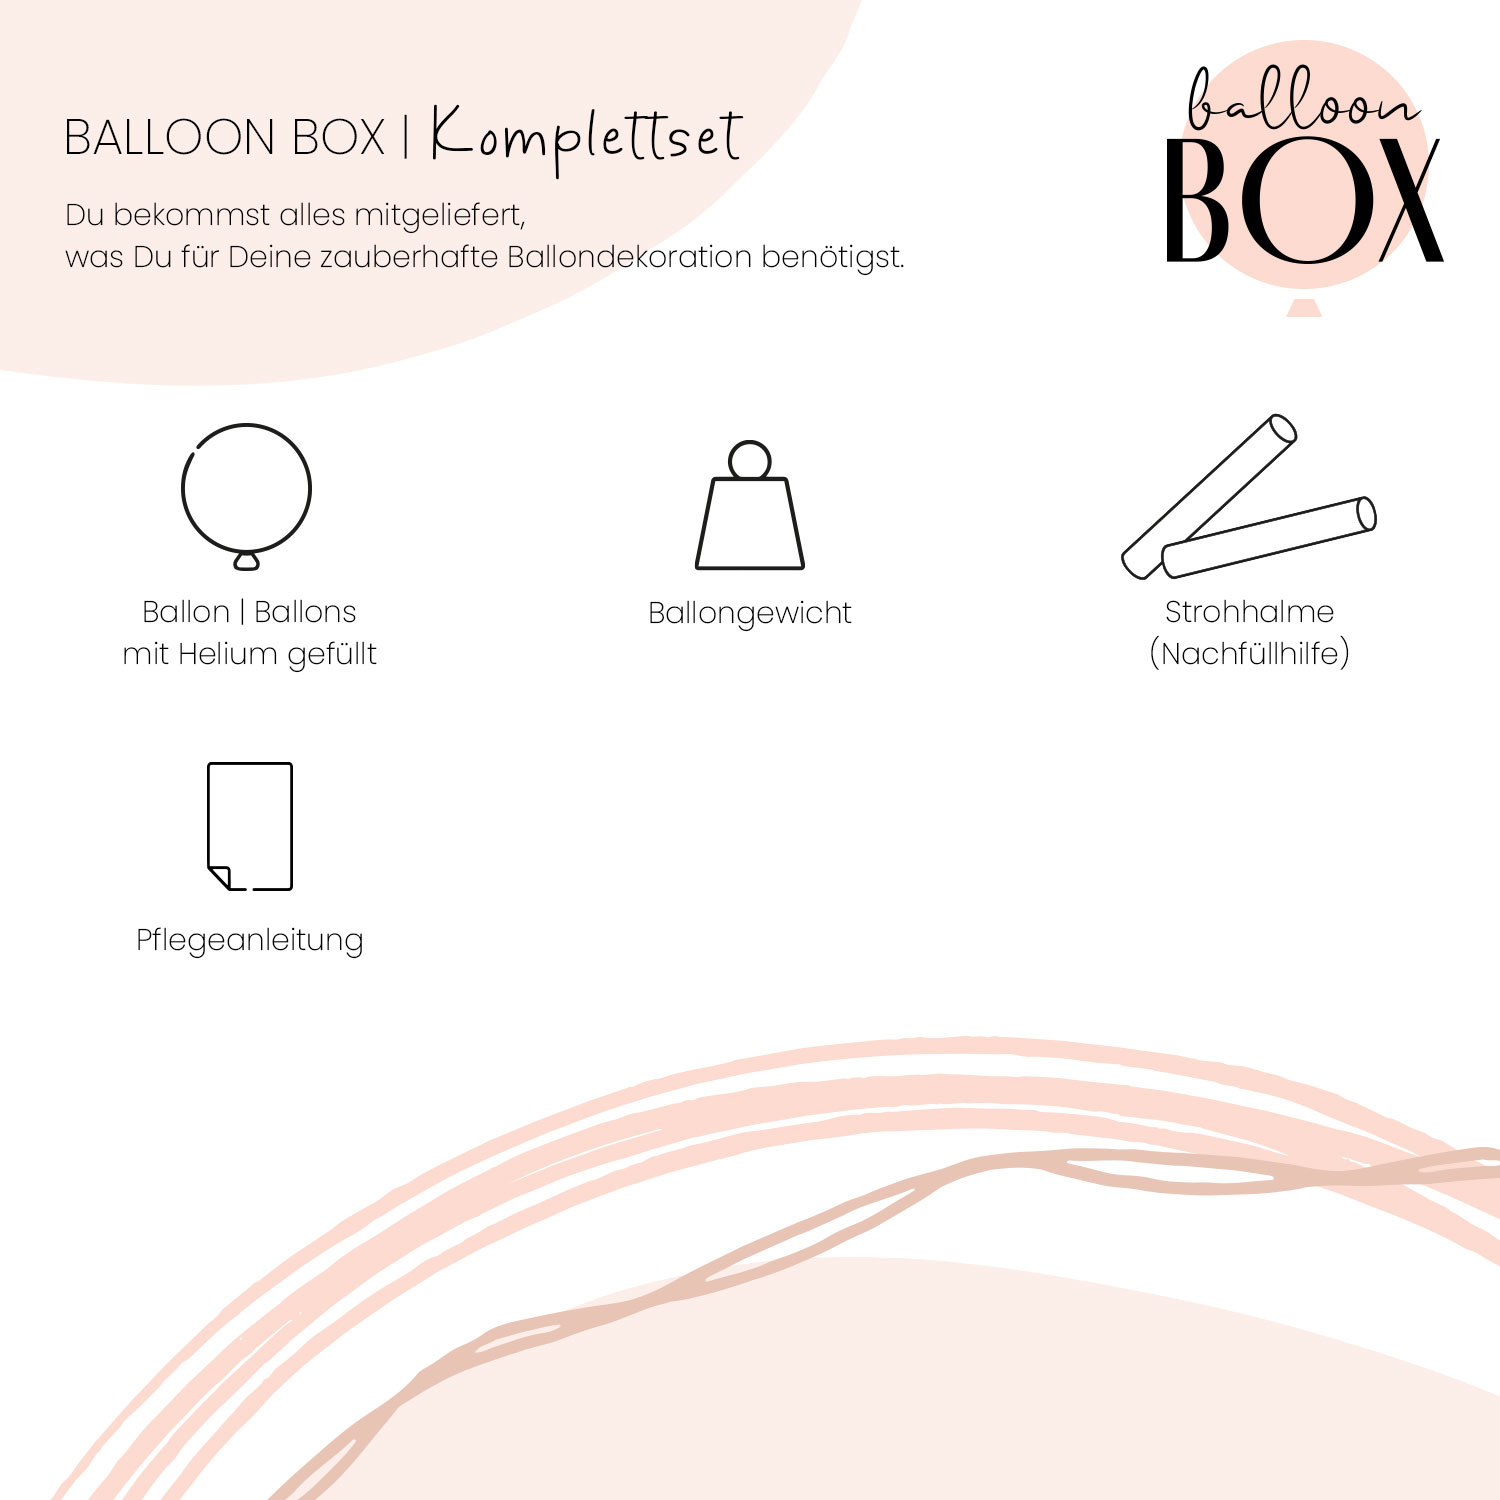 Personalisierter Ballon in a Box - Welcome the the World, Baby Boy!